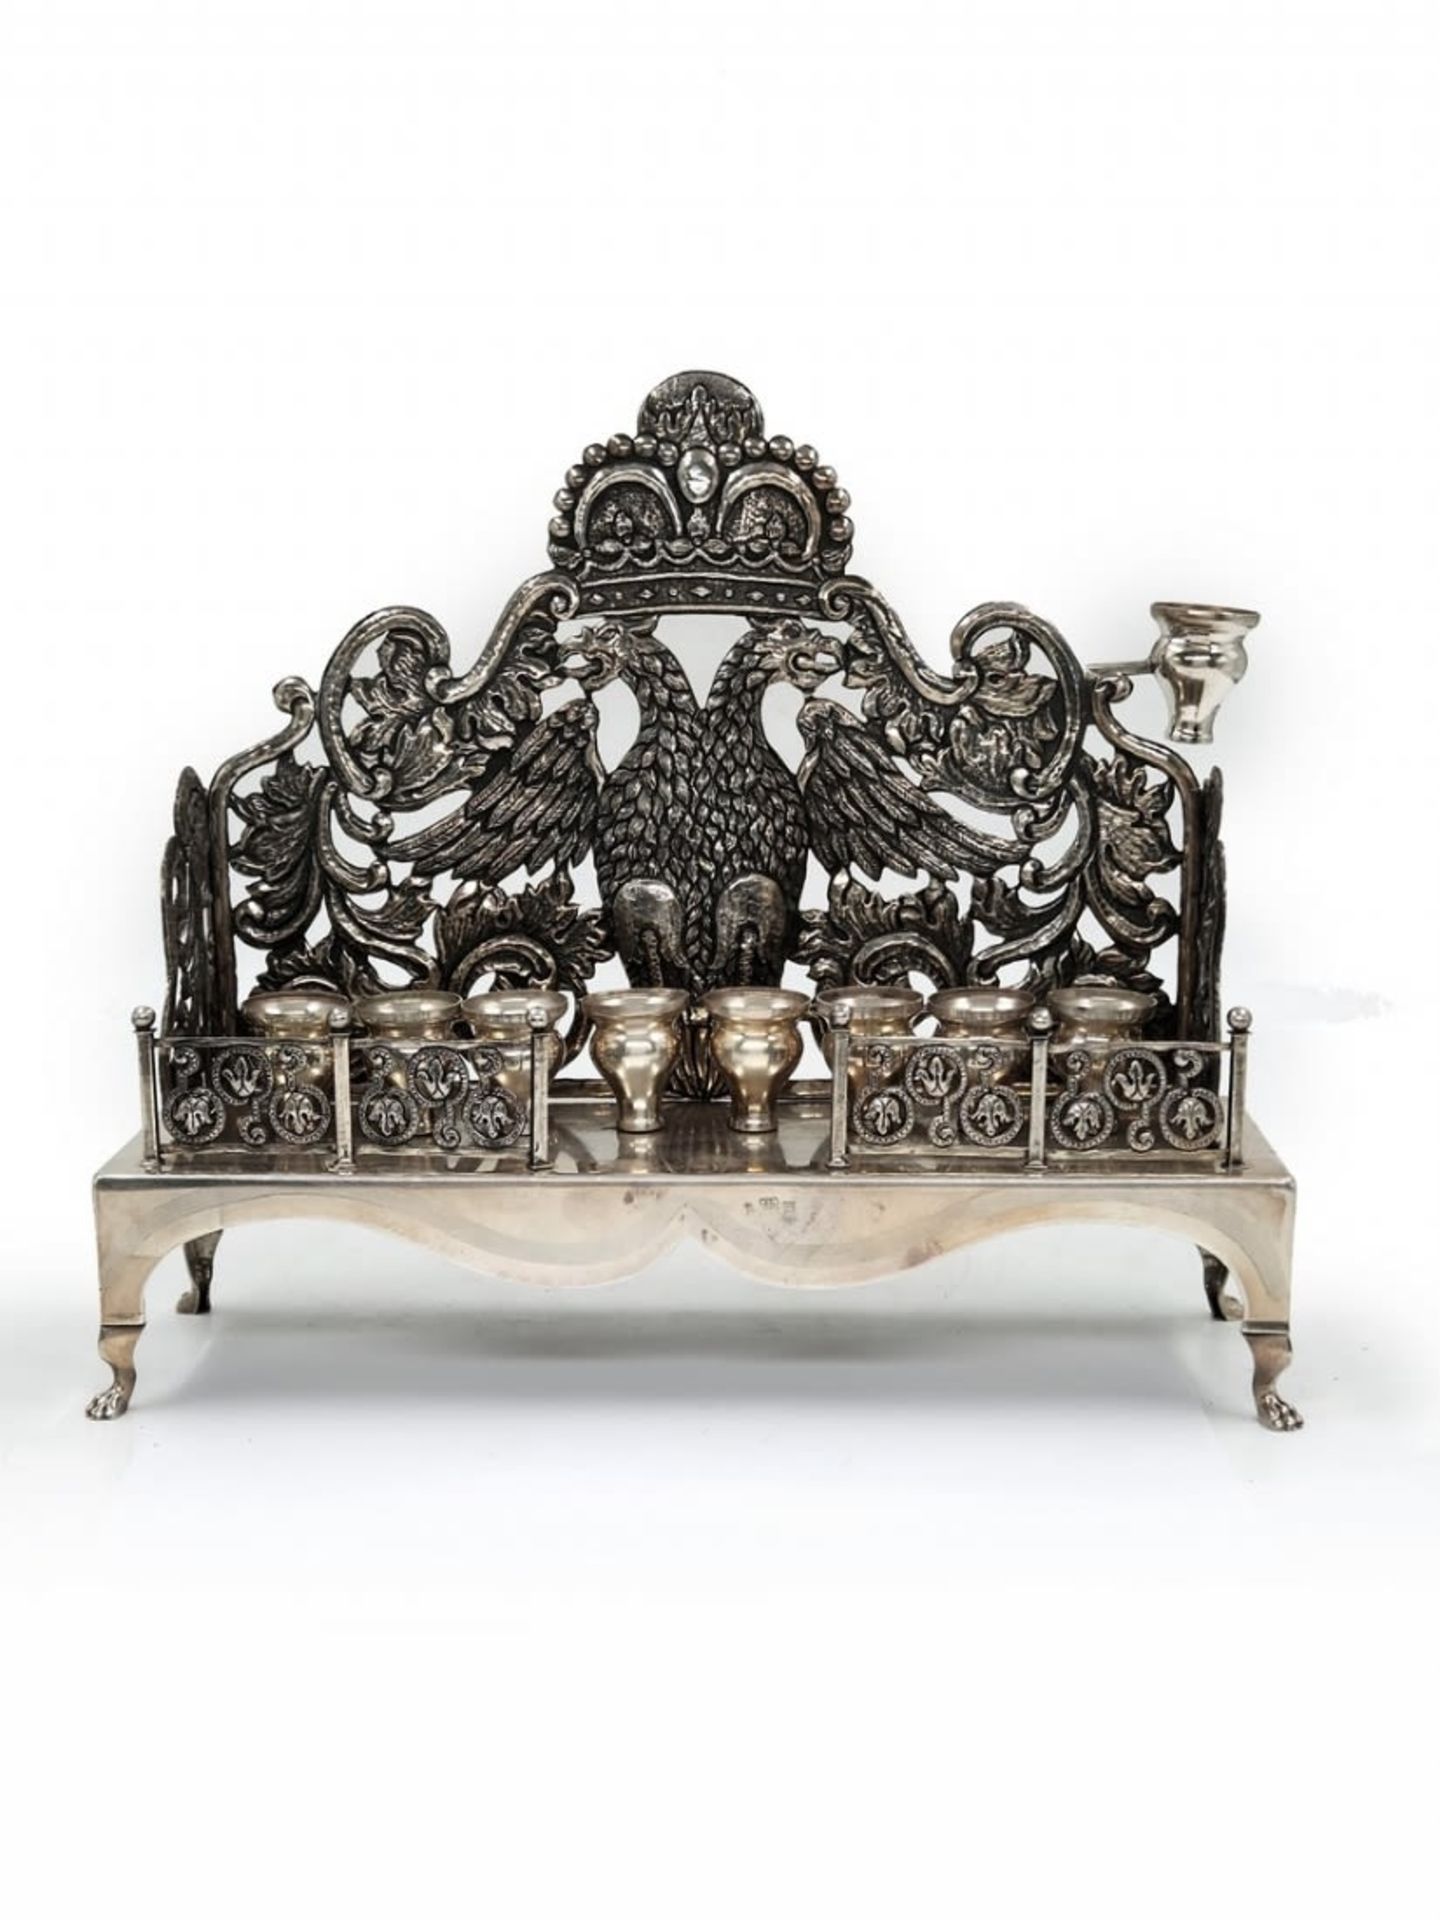 Impressive and beautiful Menorah made of sterling silver, (signed), decorated with an eagle pattern,